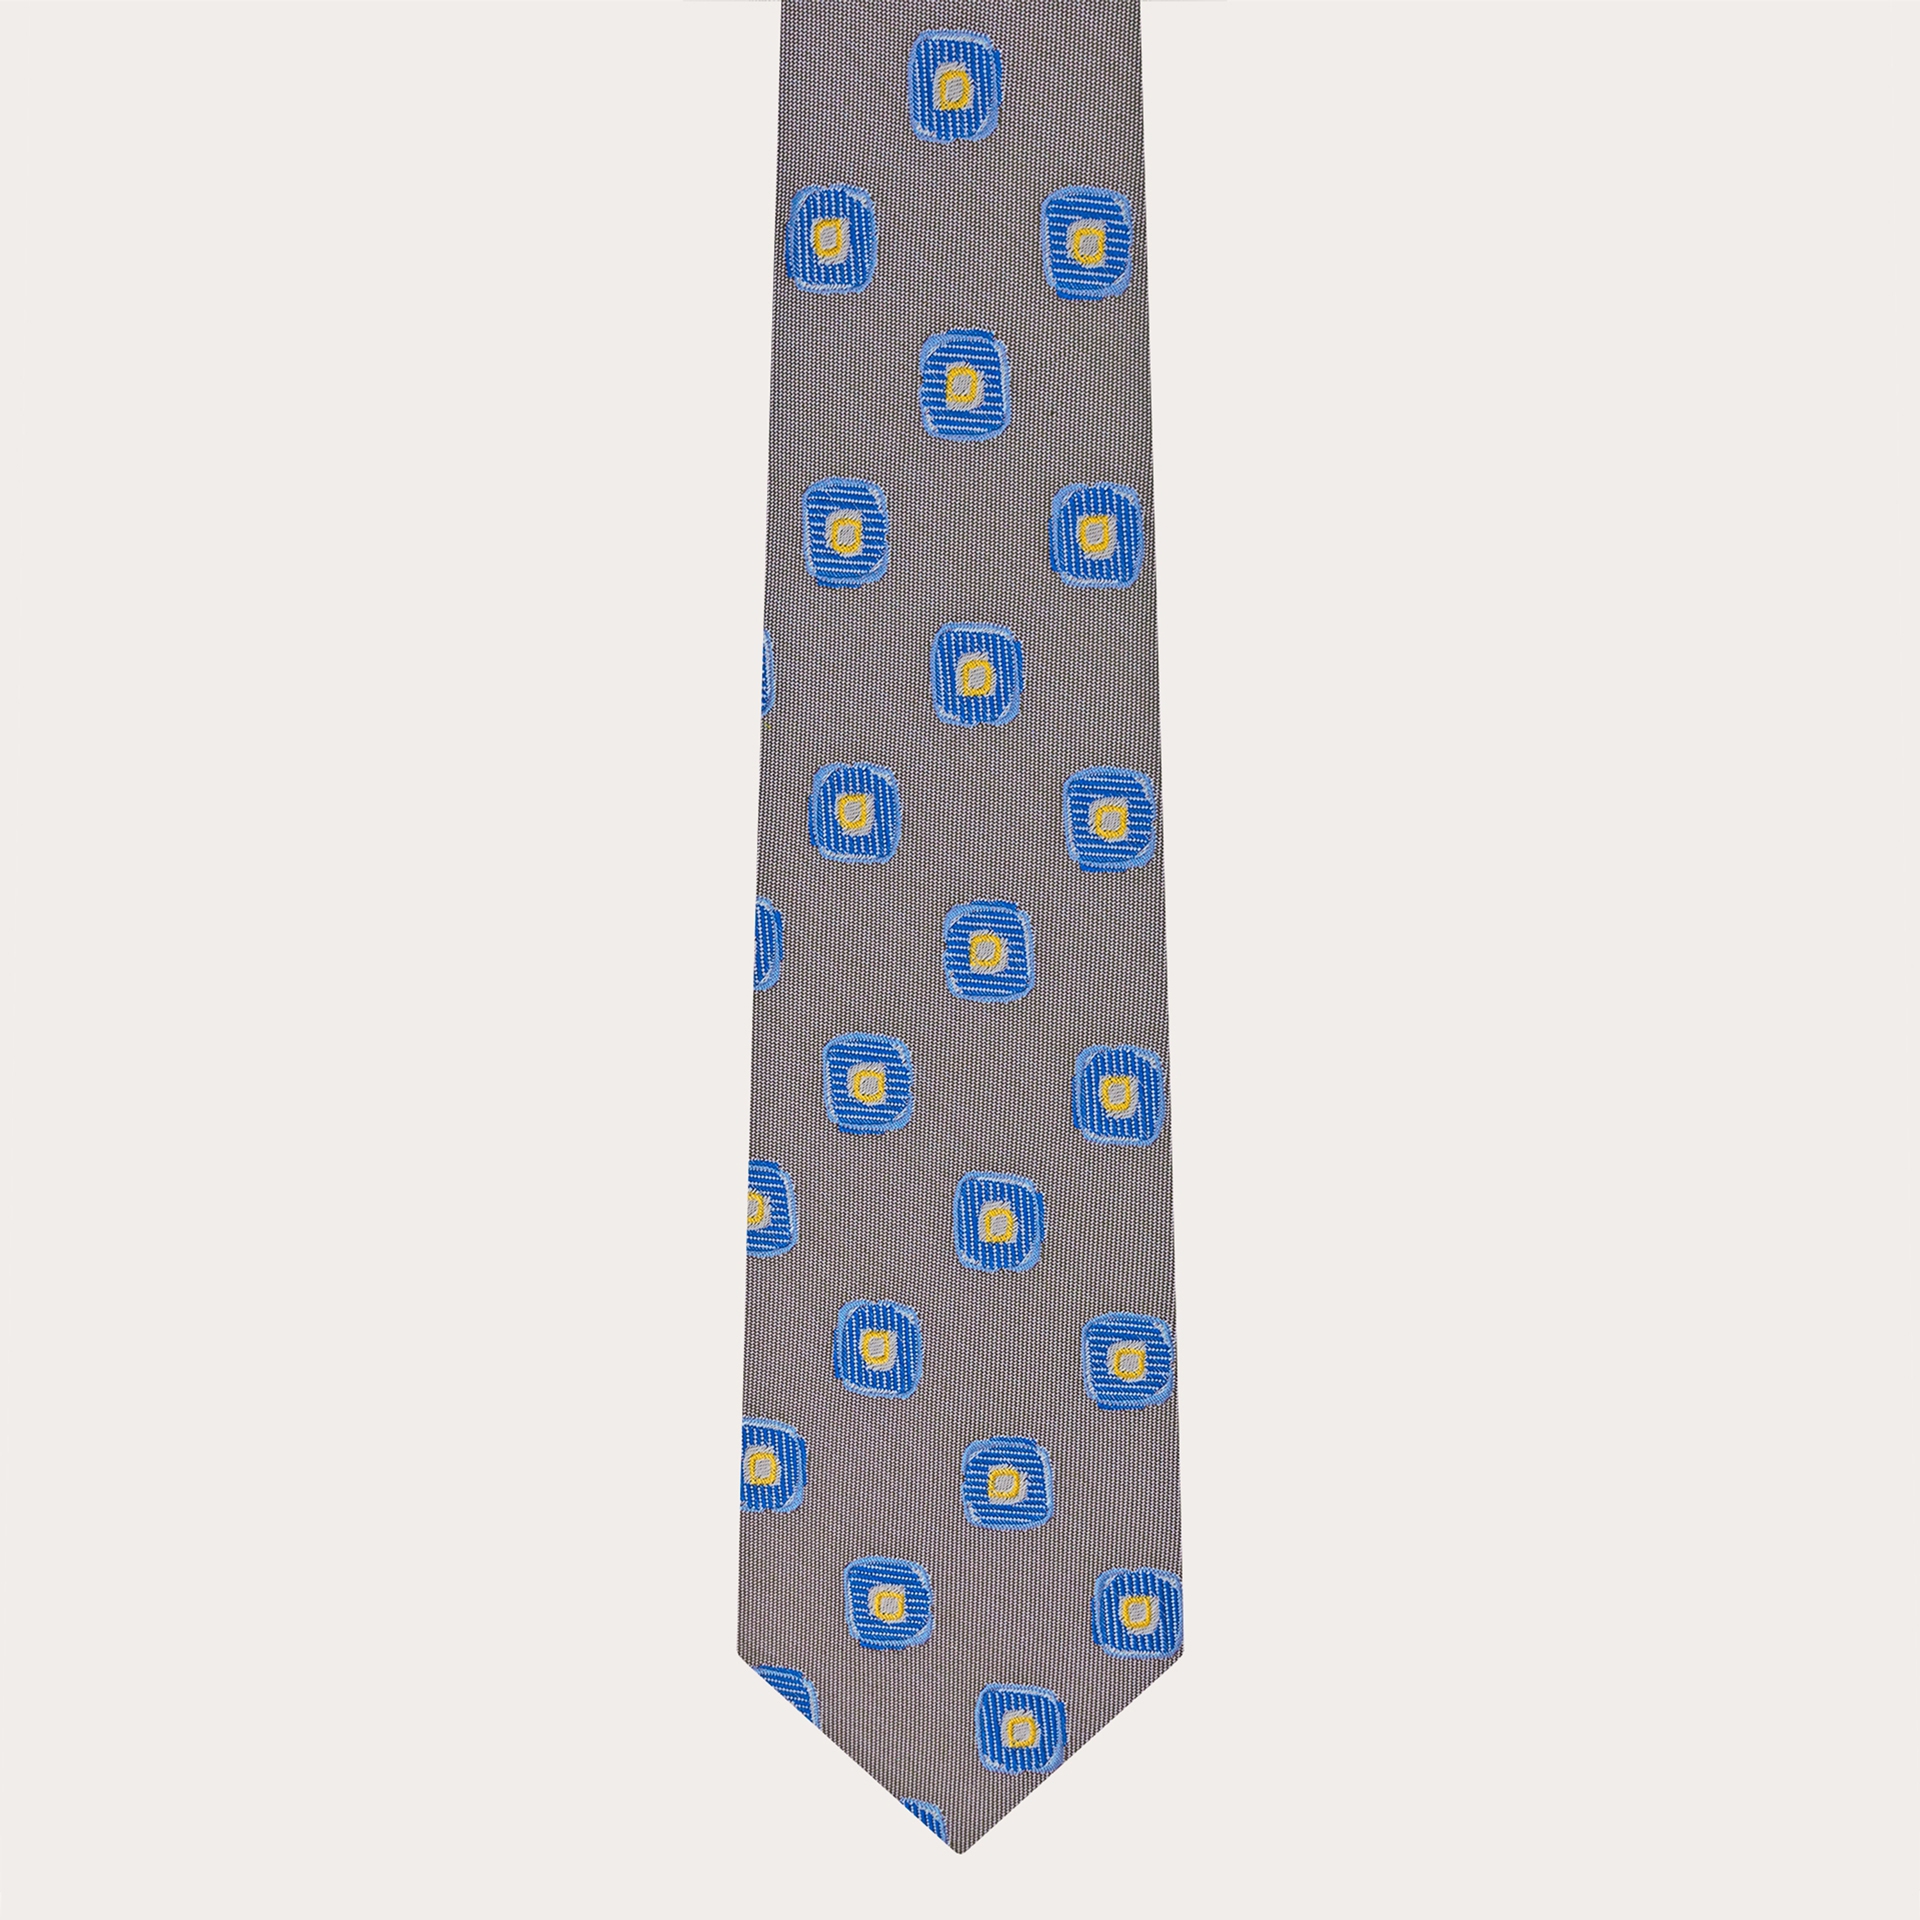 Men's tie in jacquard silk, taupe with blue geometric pattern